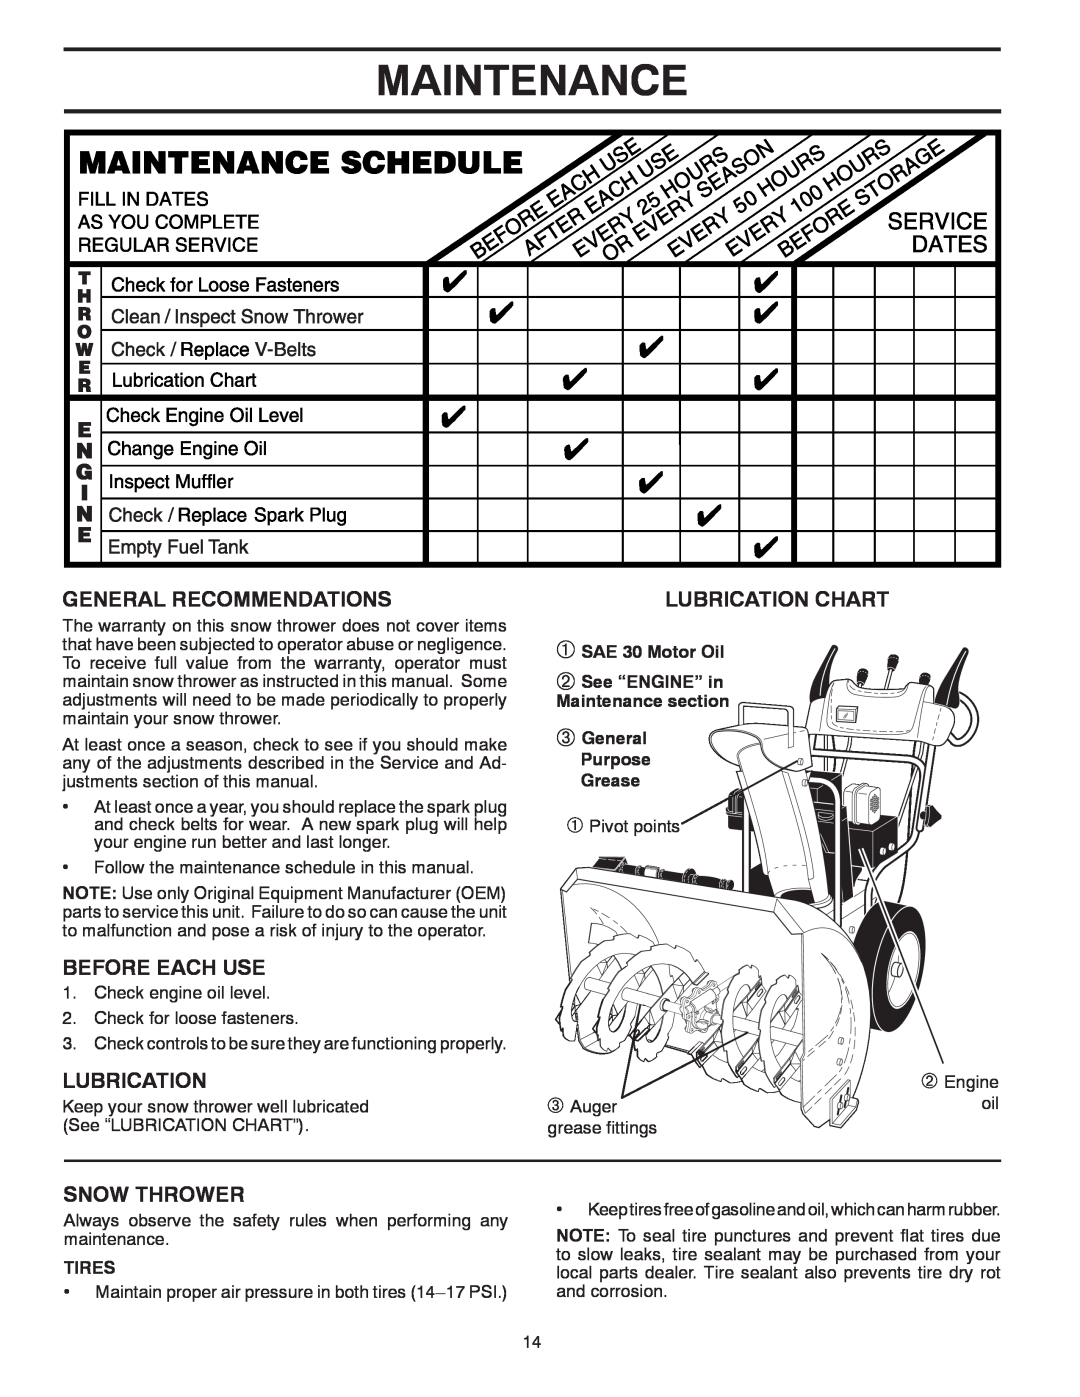 Poulan PP291E27, 435564 Maintenance, General Recommendations, Before Each Use, Snow Thrower, Lubrication Chart 